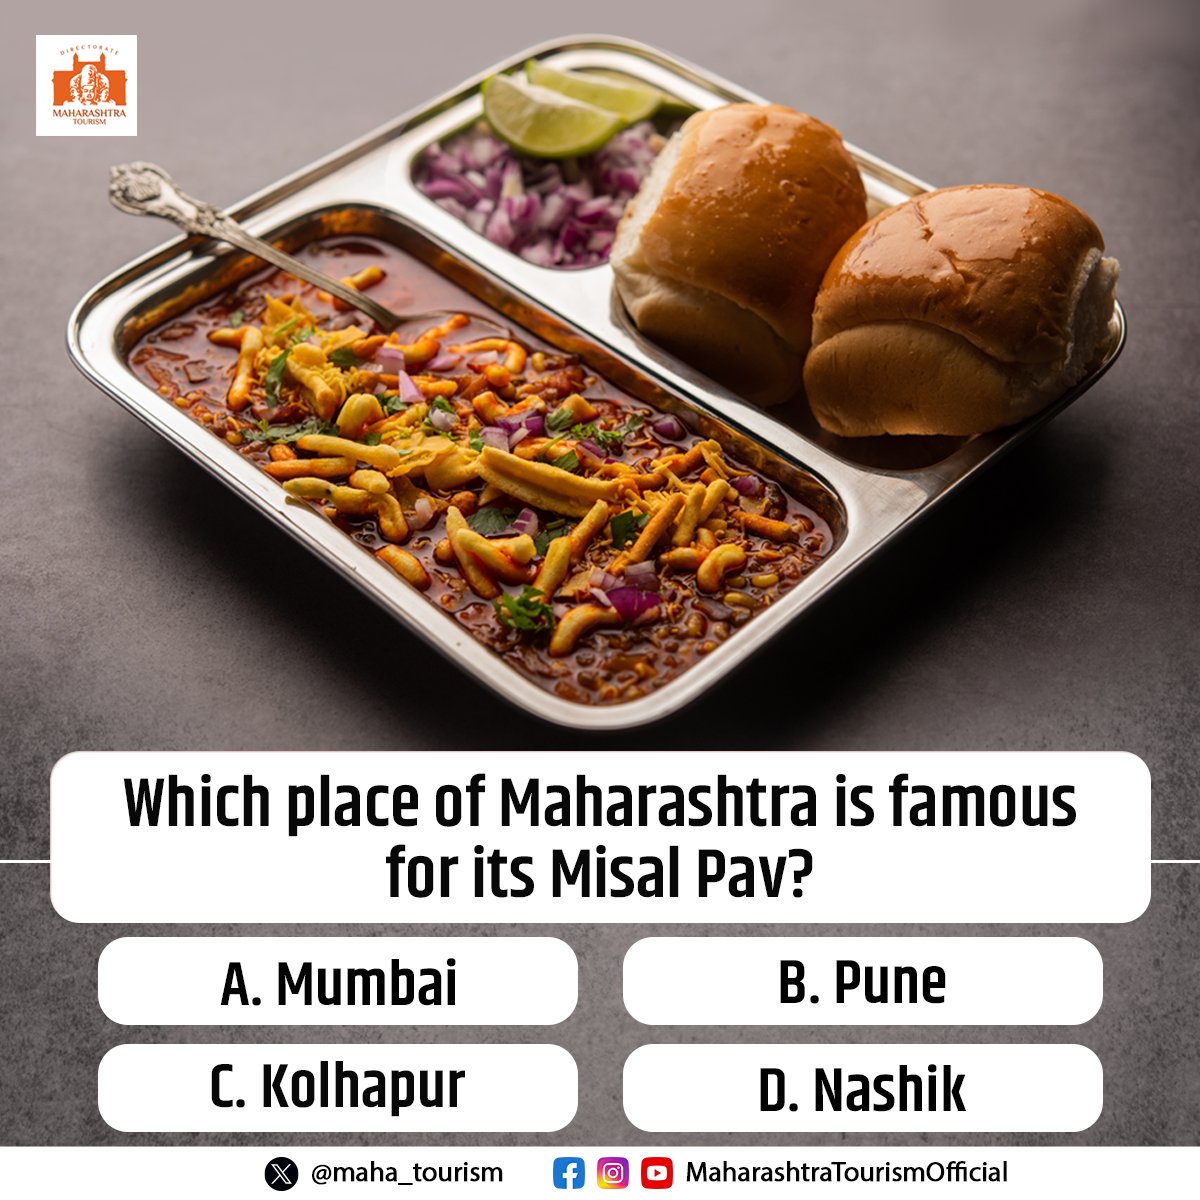 Spice up your knowledge with the trivia. Can you guess which place in Maharashtra brings you the best flavorful Misal Pav to your plate? Comment down your thoughts. #maharashtratourism #misalpav #Food